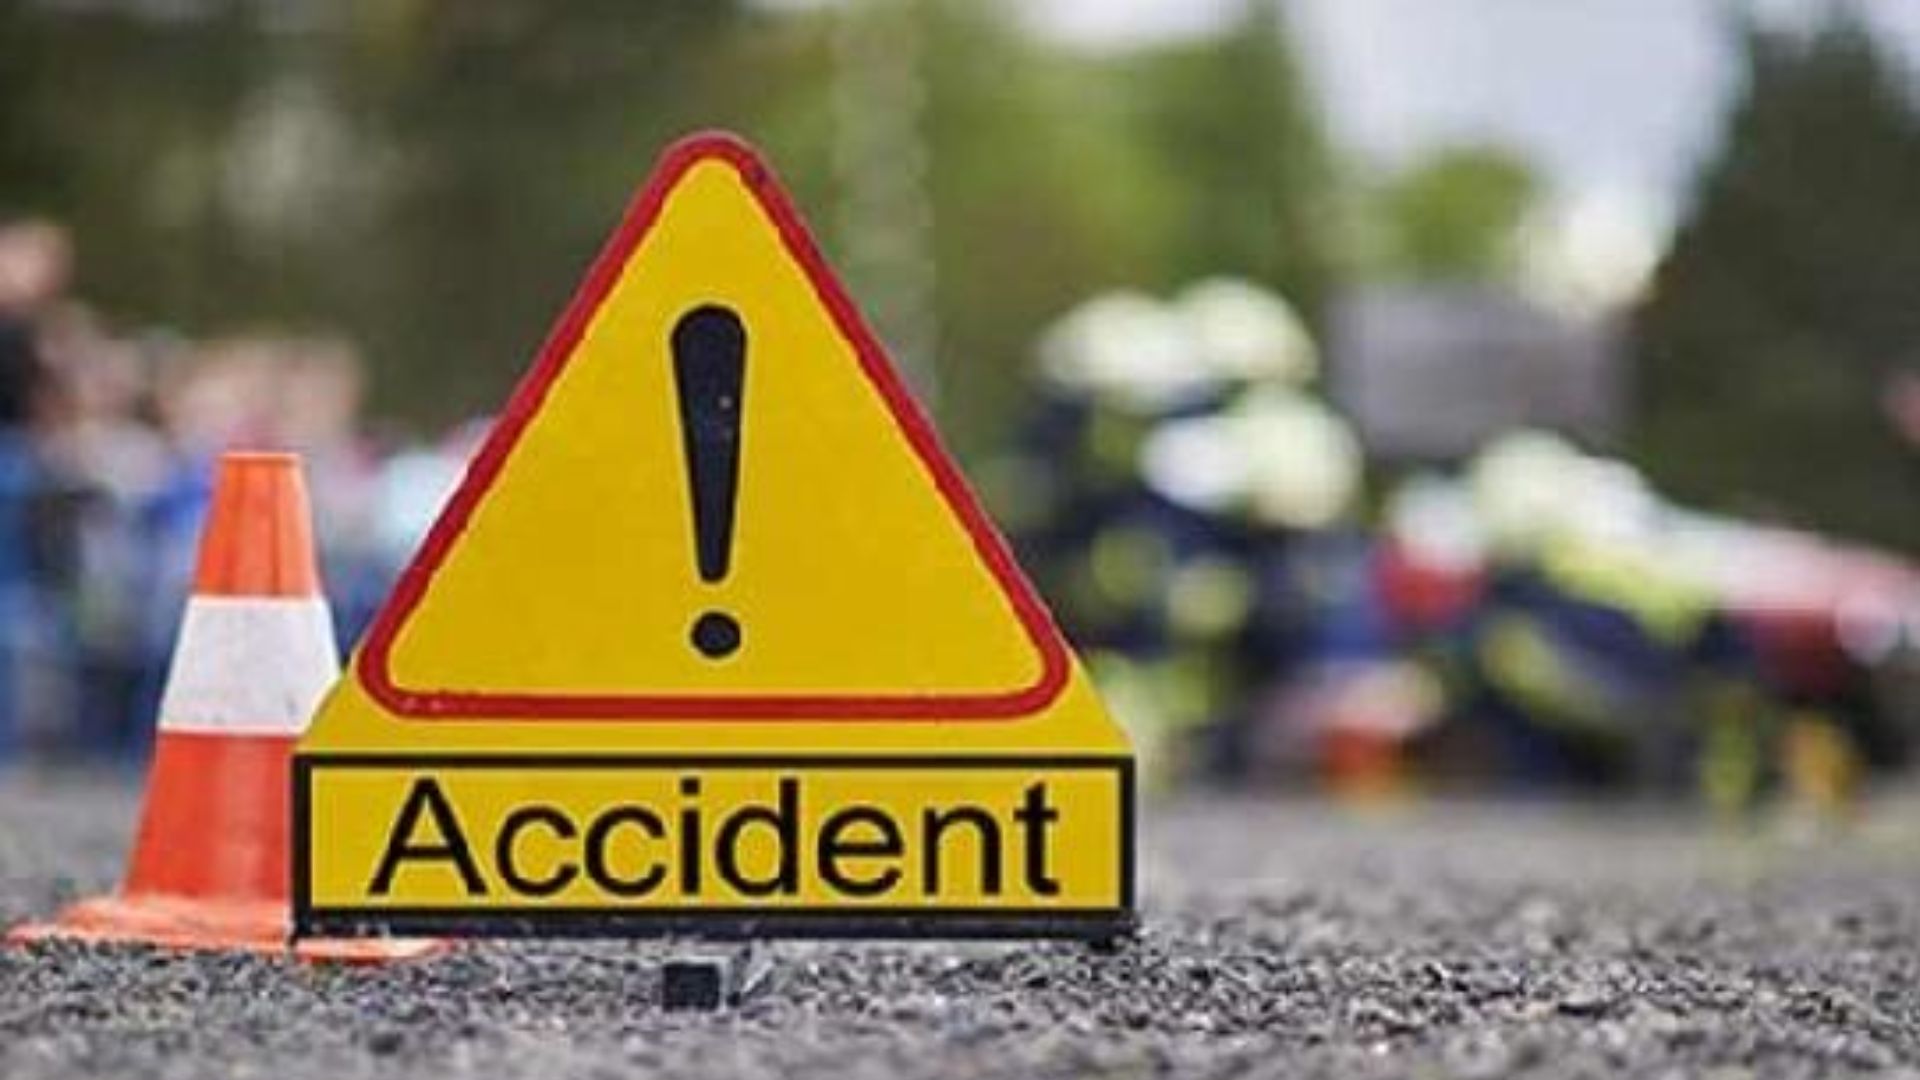 Passengers escape fatal accident as bike hits bus in Shimla